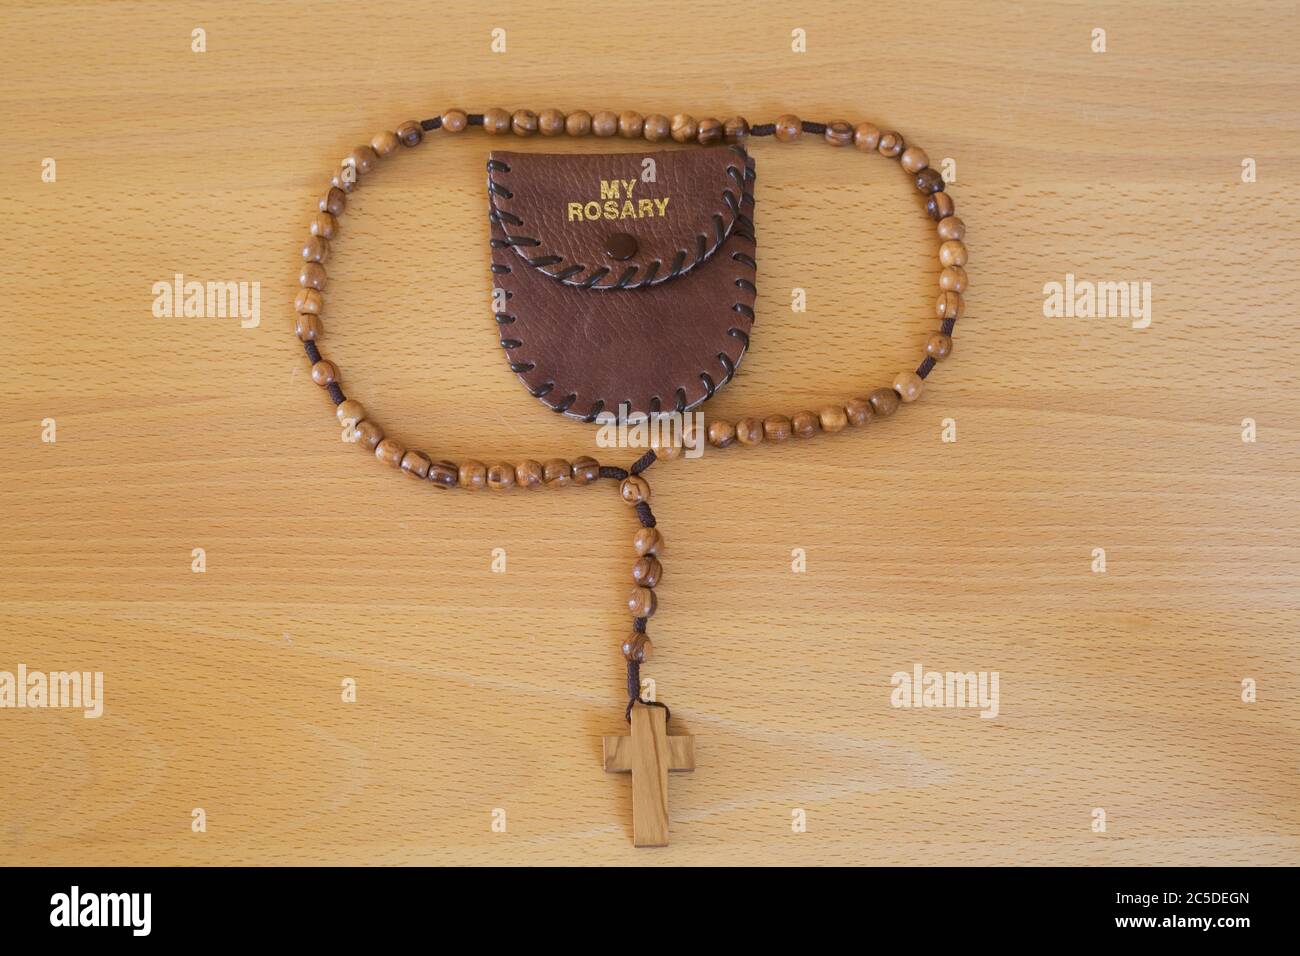 Wooden sets of rosary beads and 'My Rosary' wallet displayed in plain wooden surface Stock Photo